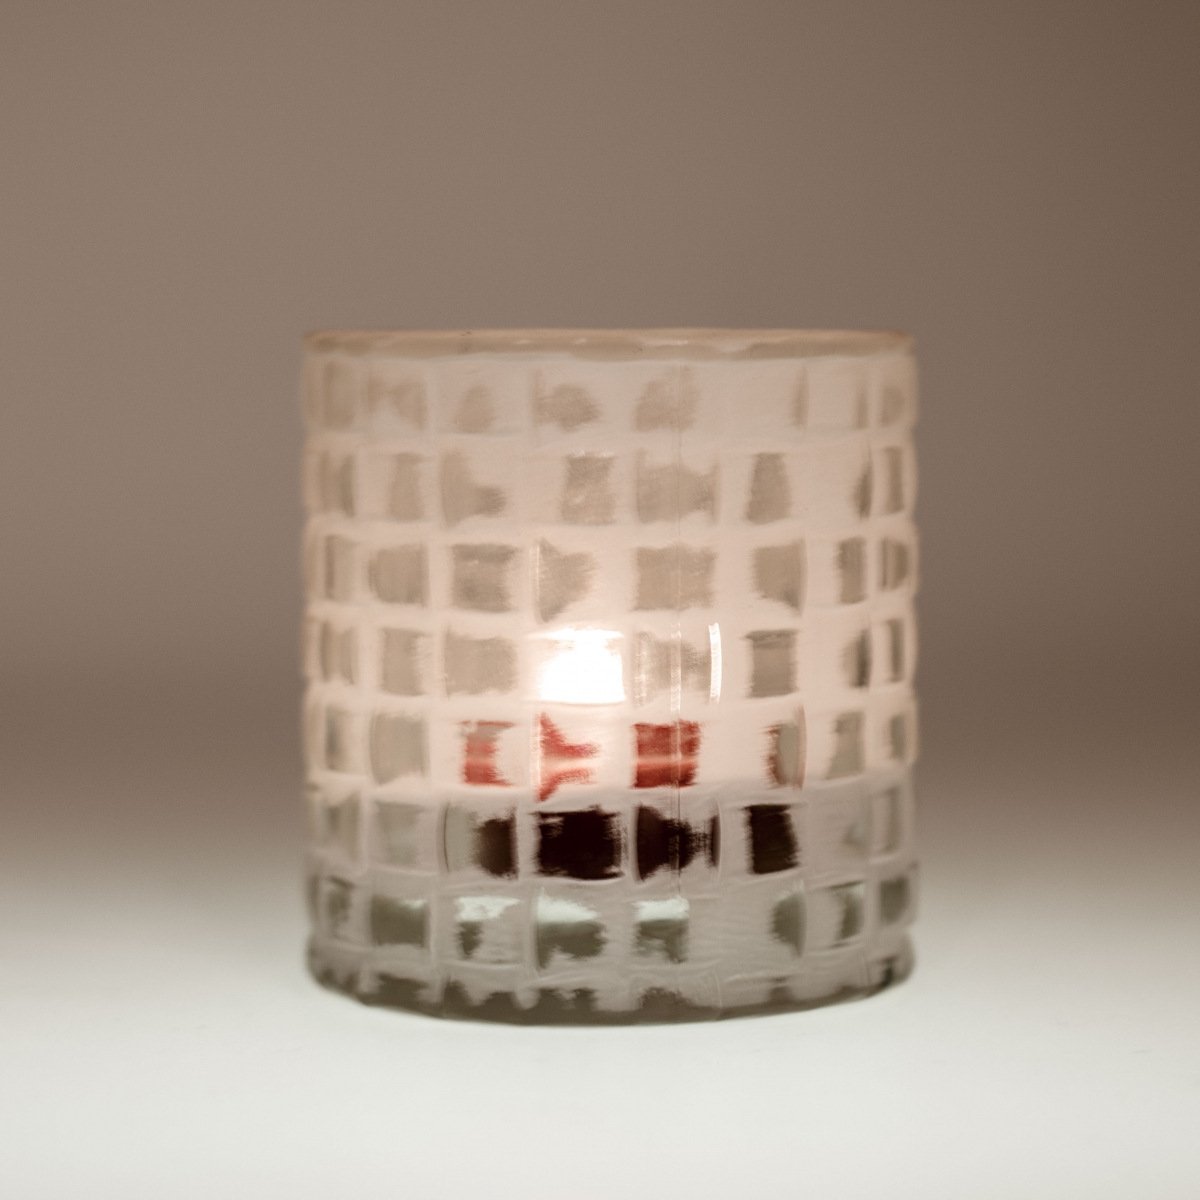 Candle Holder :Rattan Weave Glass Jar , Polished Color ,Ceramic White , Home Sweet Home , China Factory , Wholesale Price-HOWCANDLE-Candles,Scented Candles,Aromatherapy Candles,Soy Candles,Vegan Candles,Jar Candles,Pillar Candles,Candle Gift Sets,Essential Oils,Reed Diffuser,Candle Holder,